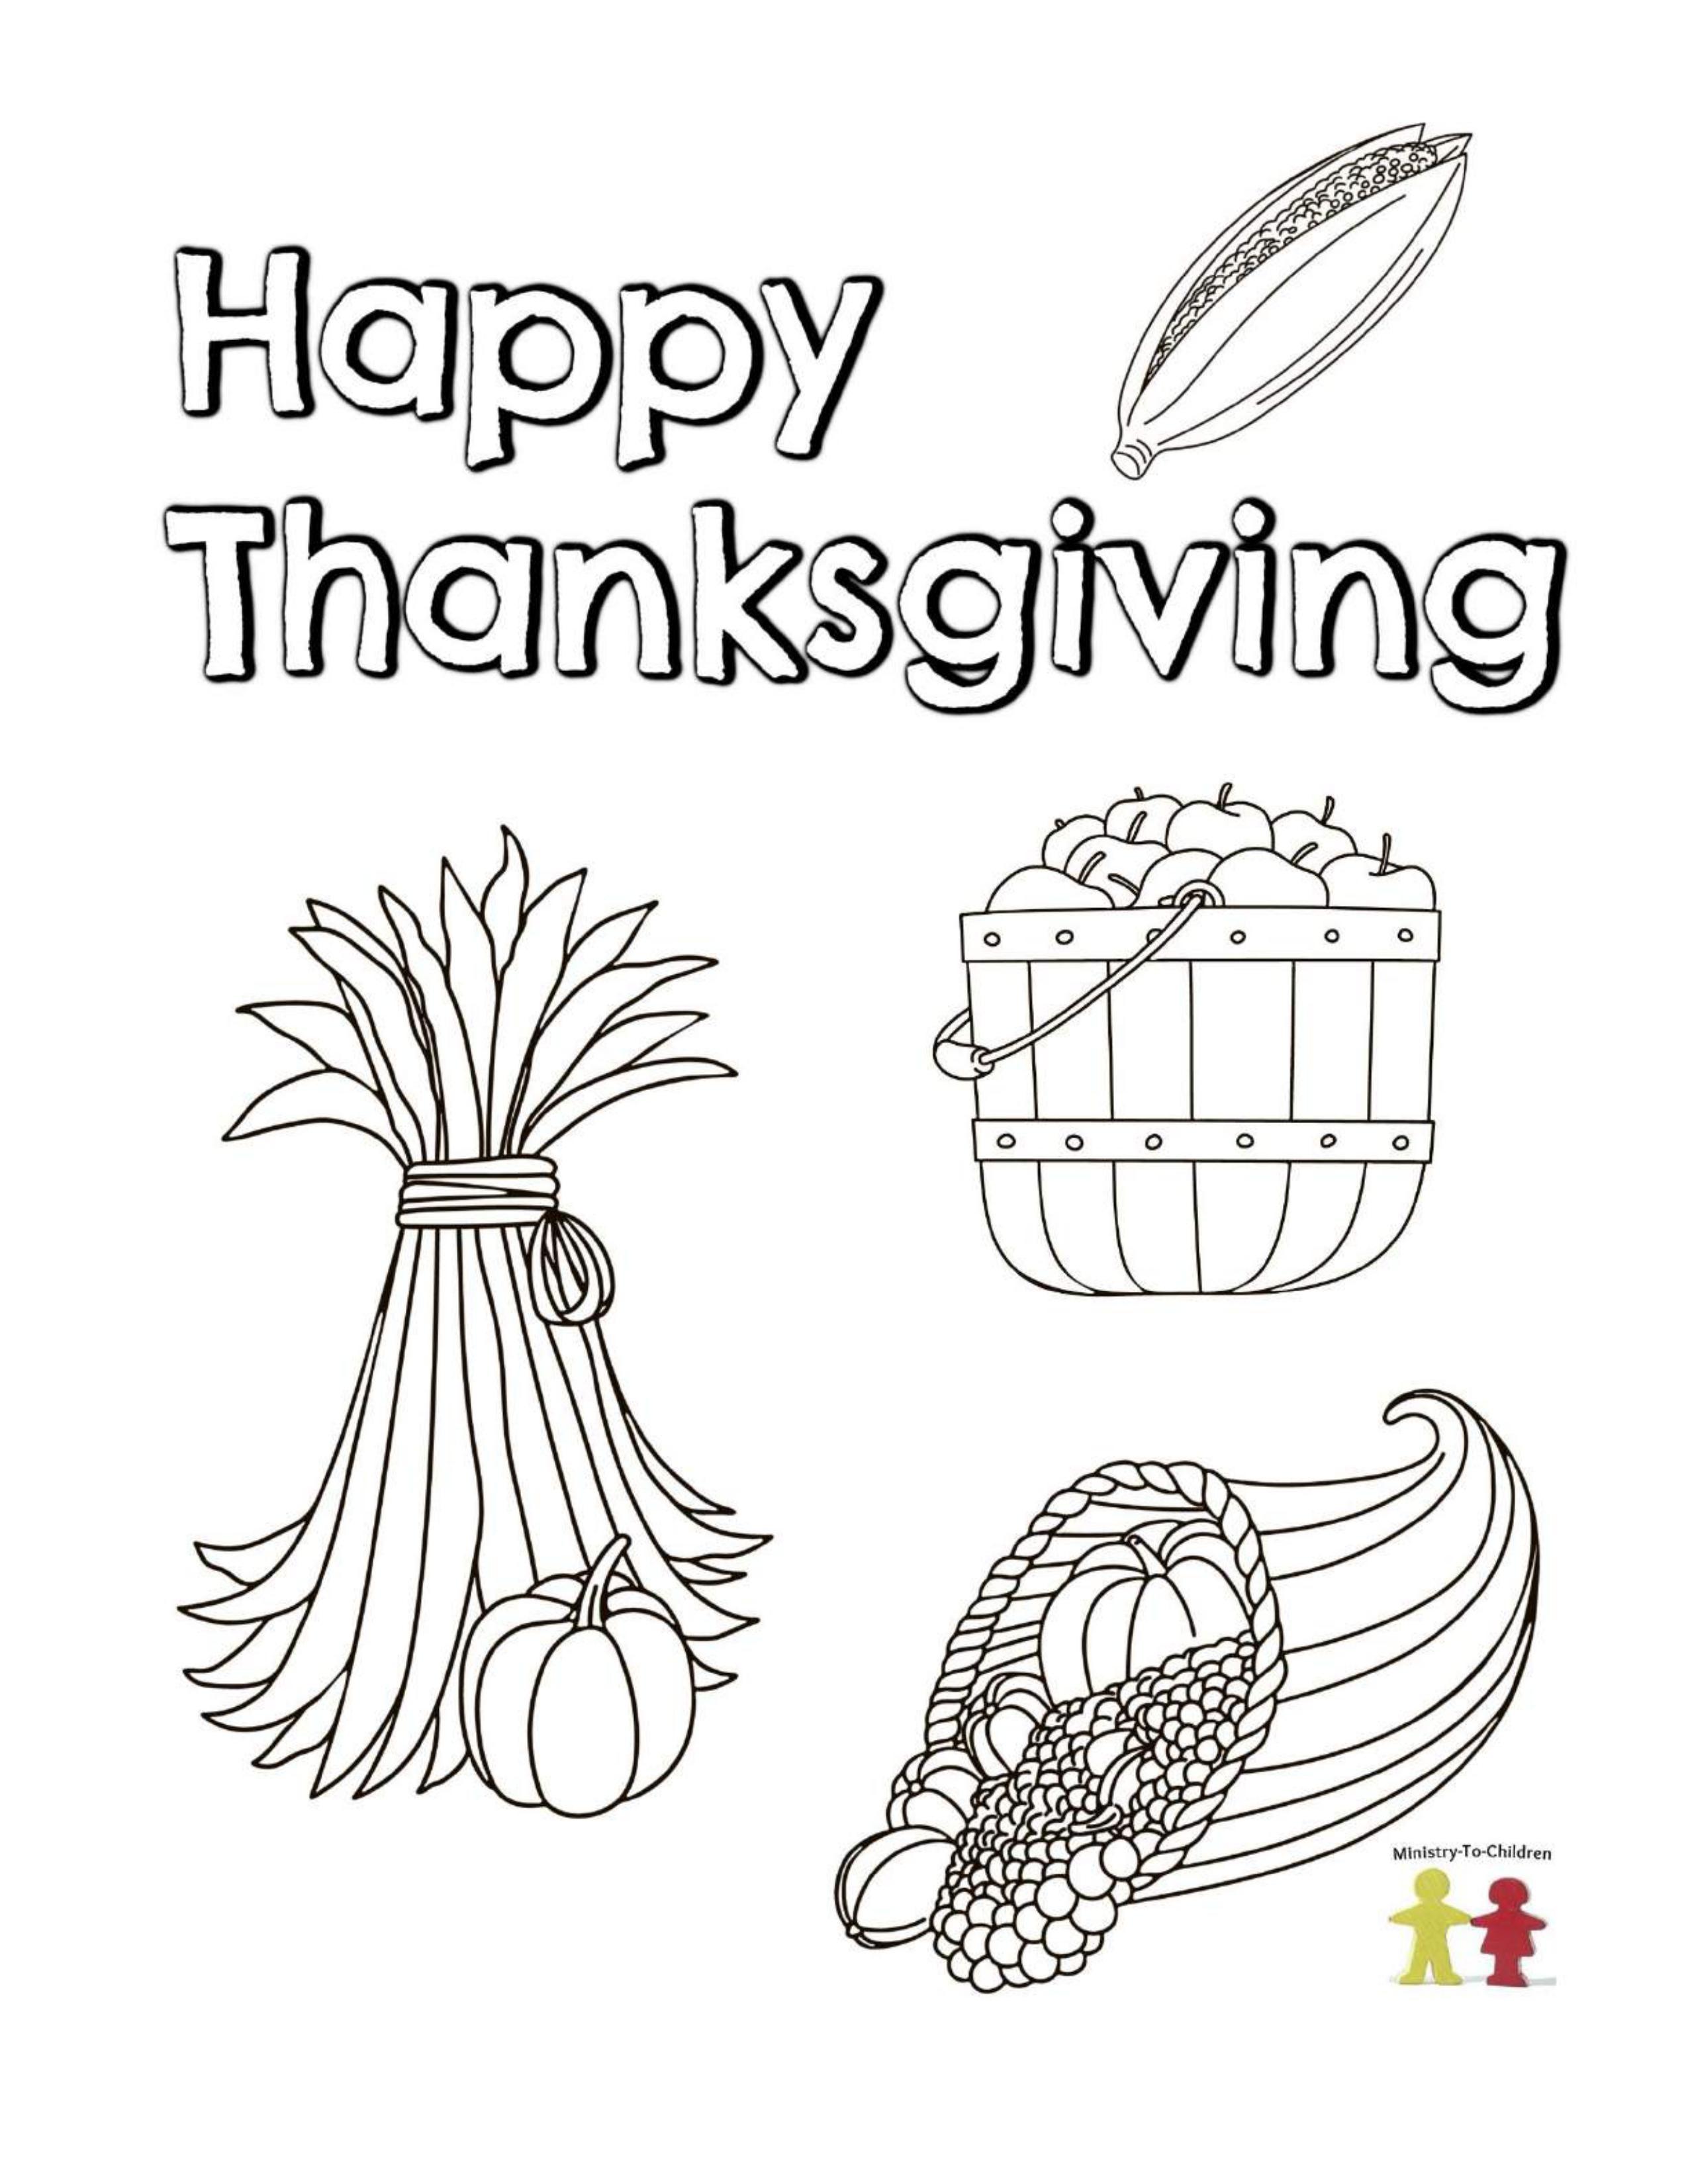 Thanksgiving coloring pages free printable for kids